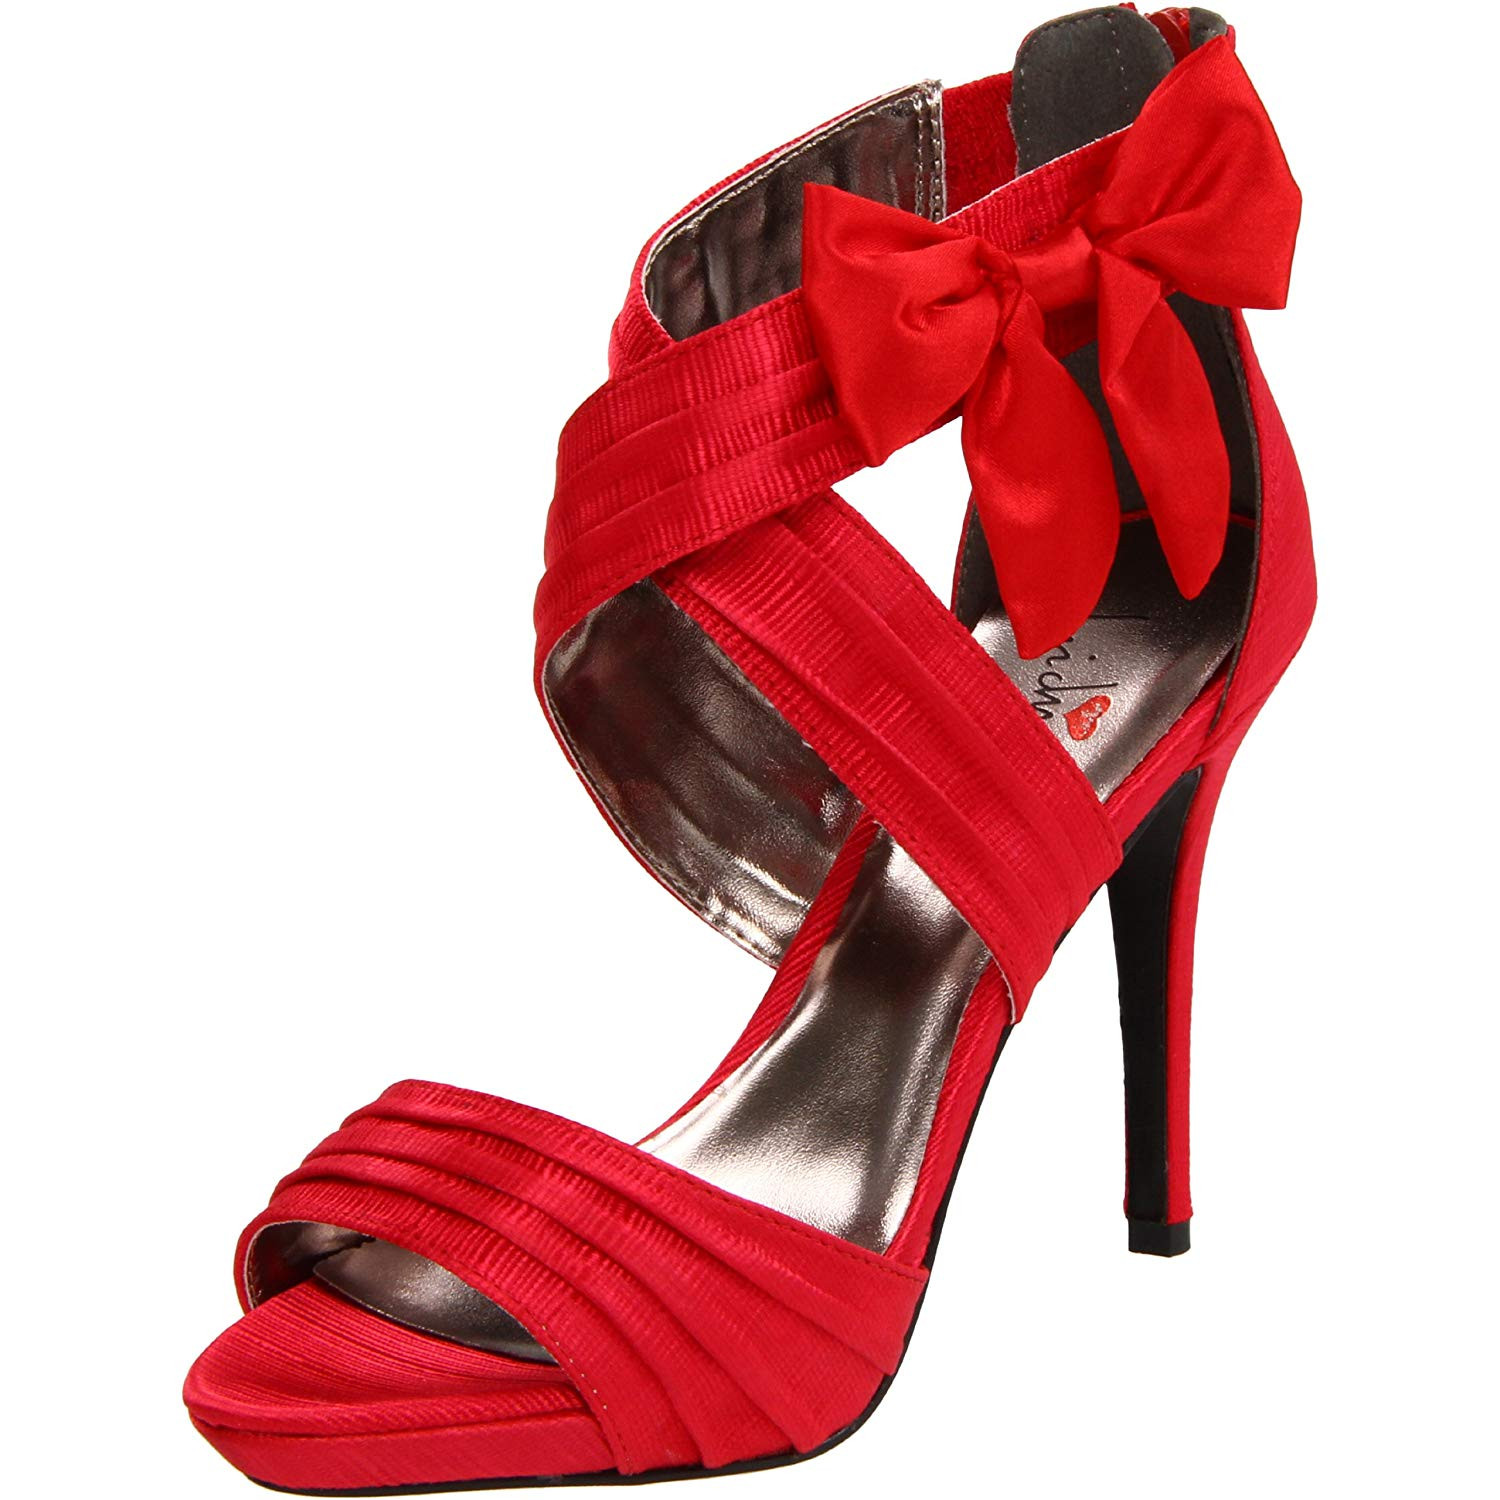 Red Wedding Shoes
 Red Wedding Shoes Lots of Wedding Ideas